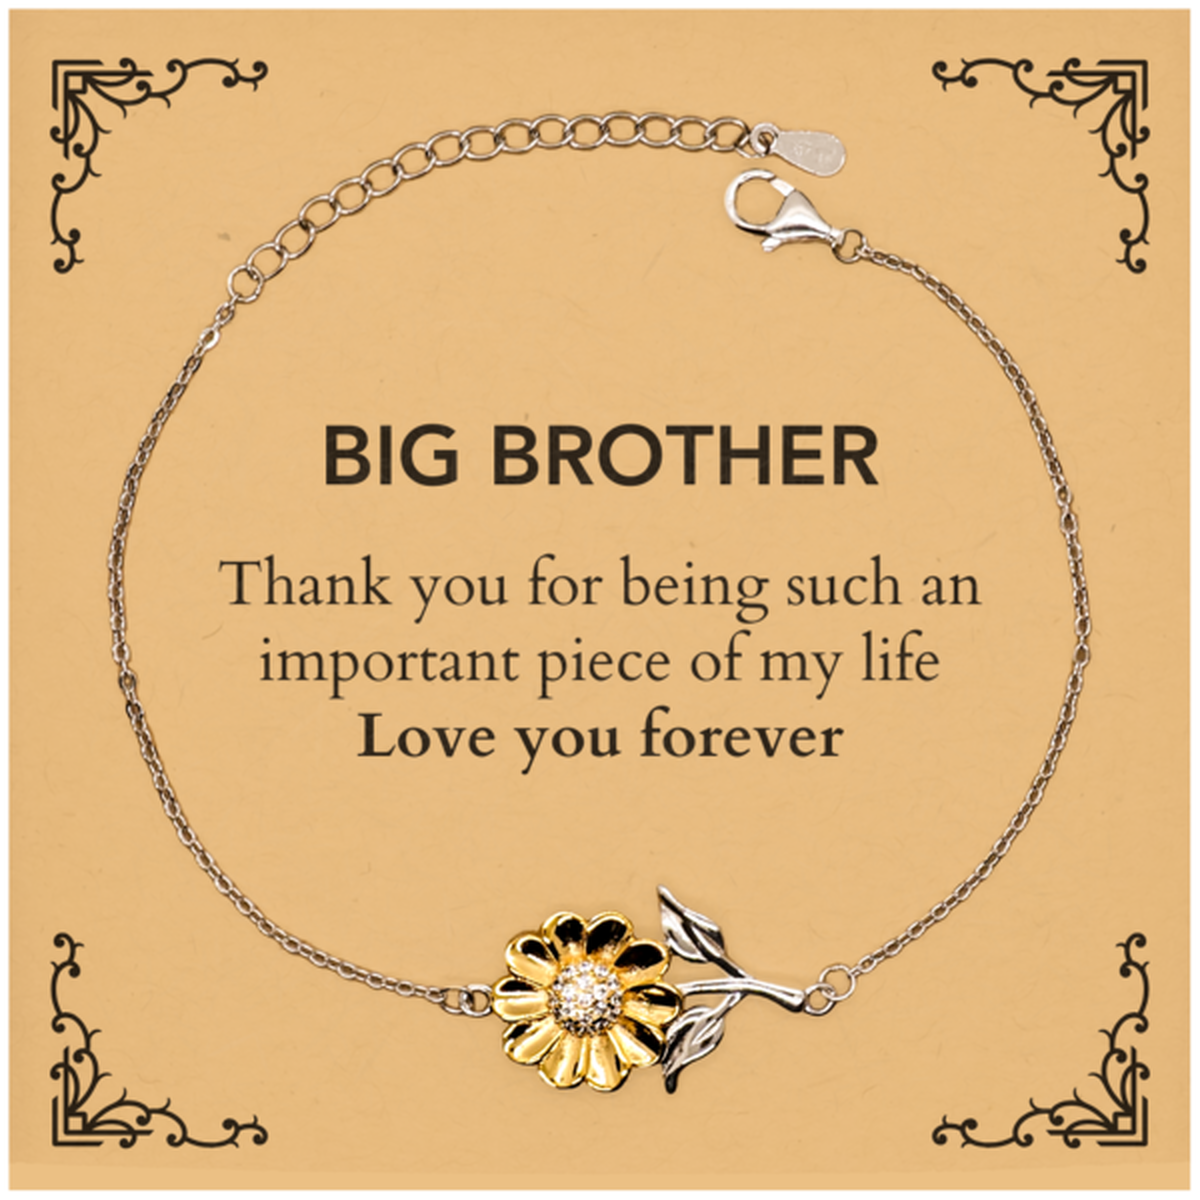 Appropriate Big Brother Sunflower Bracelet Epic Birthday Gifts for Big Brother Thank you for being such an important piece of my life Big Brother Christmas Mothers Fathers Day